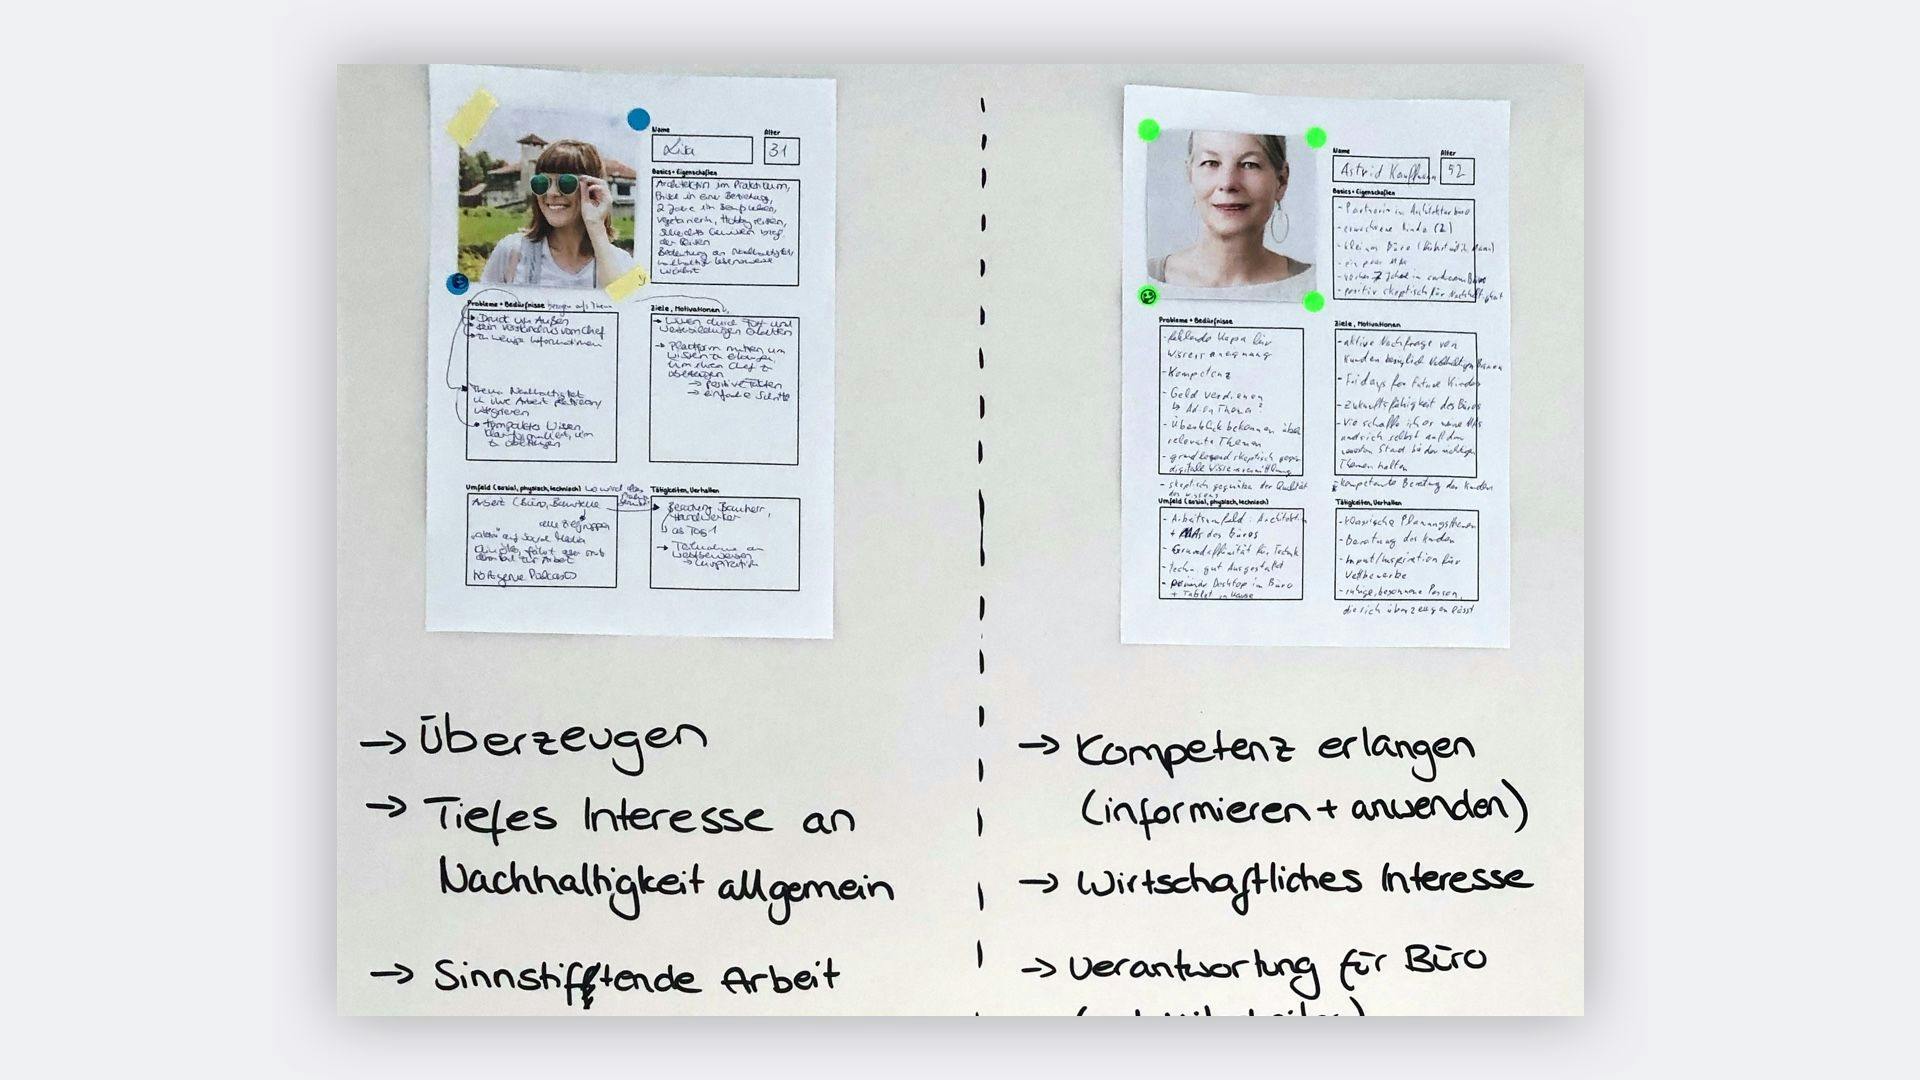 Proto-personas created during the kick-off Workshop